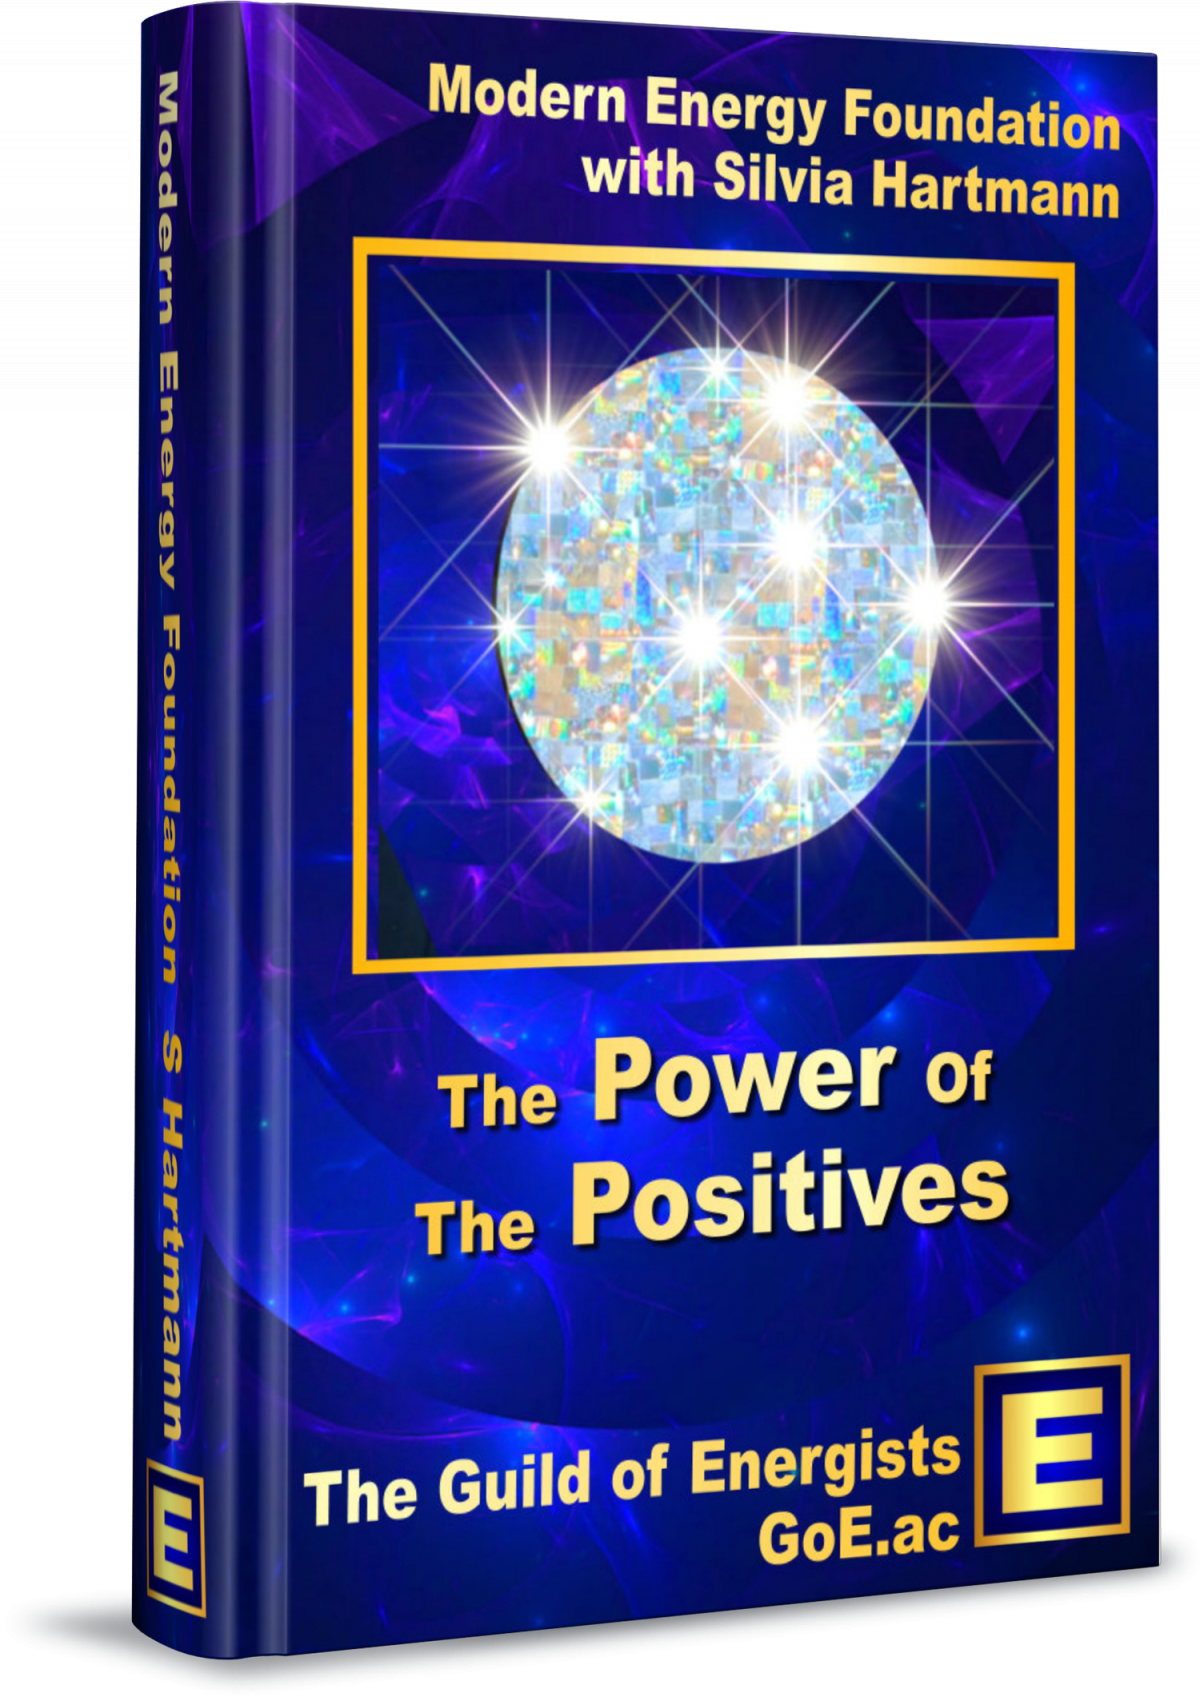 Power of the Positives